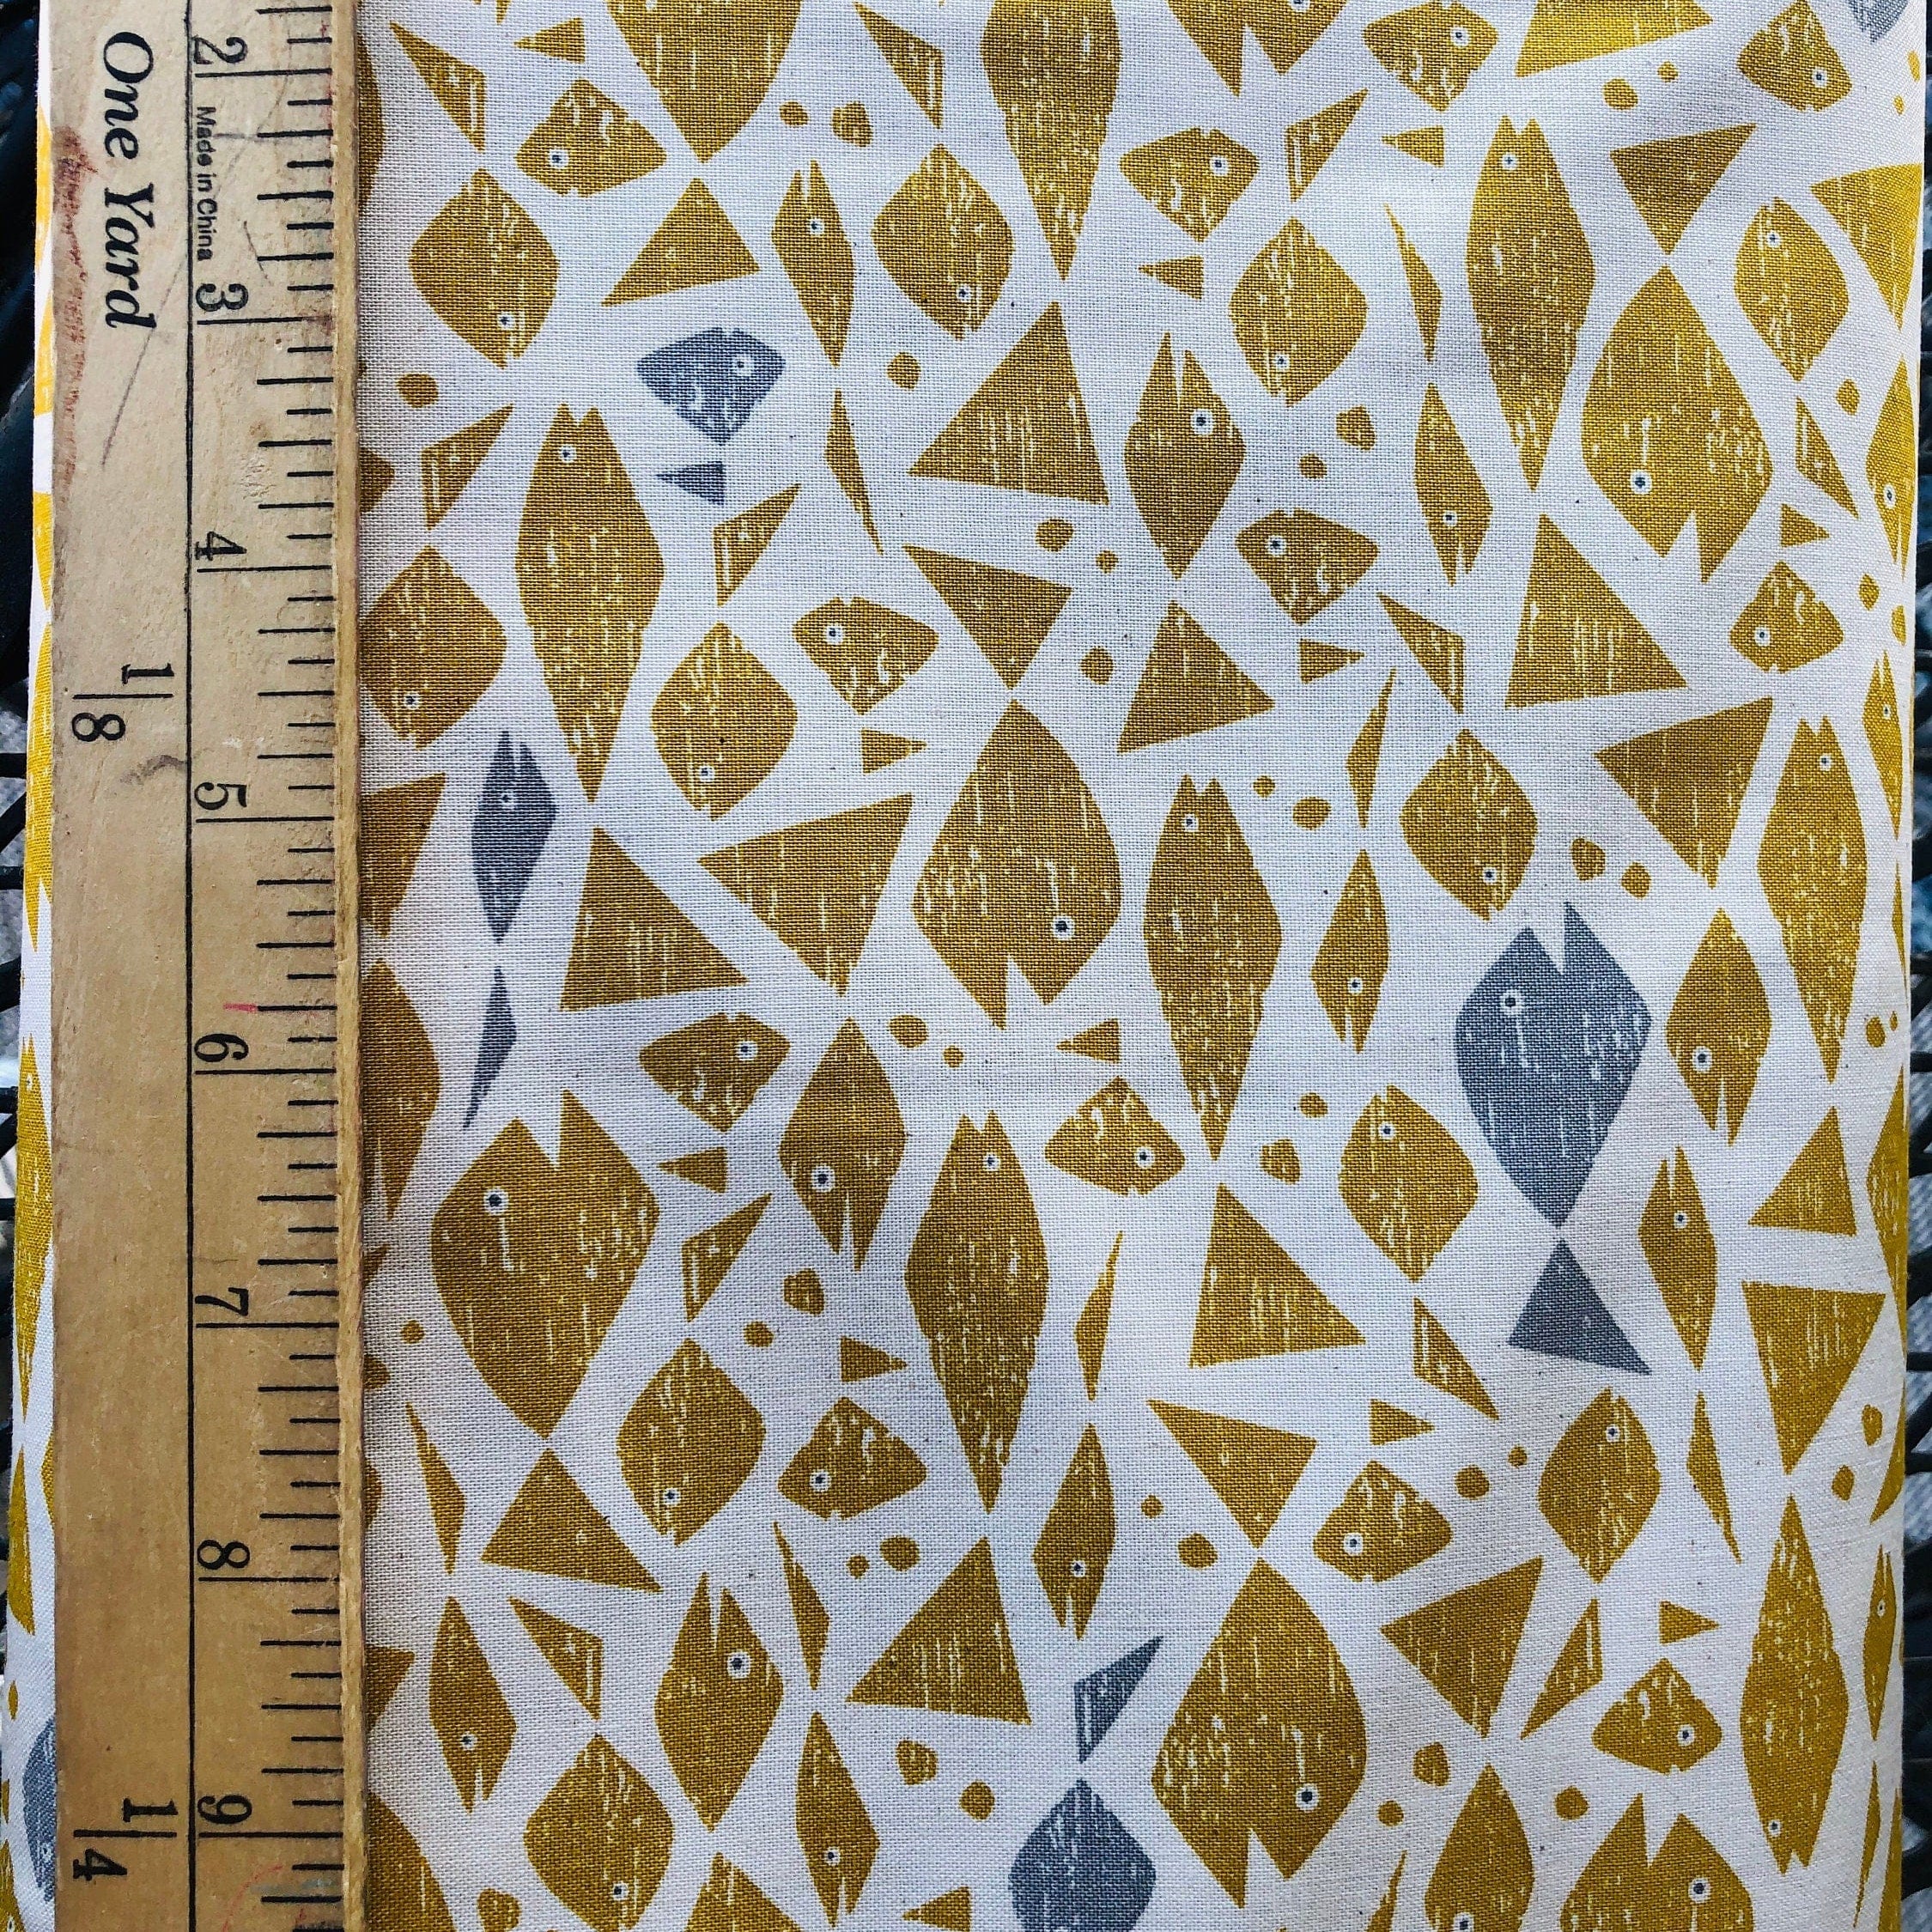 By The Seaside - Happy Fish - Yellow Unbleached Fabric - Loes Van Oosten - Cotton + Steel - Quilting Cotton Fabric - LV102-YE2U